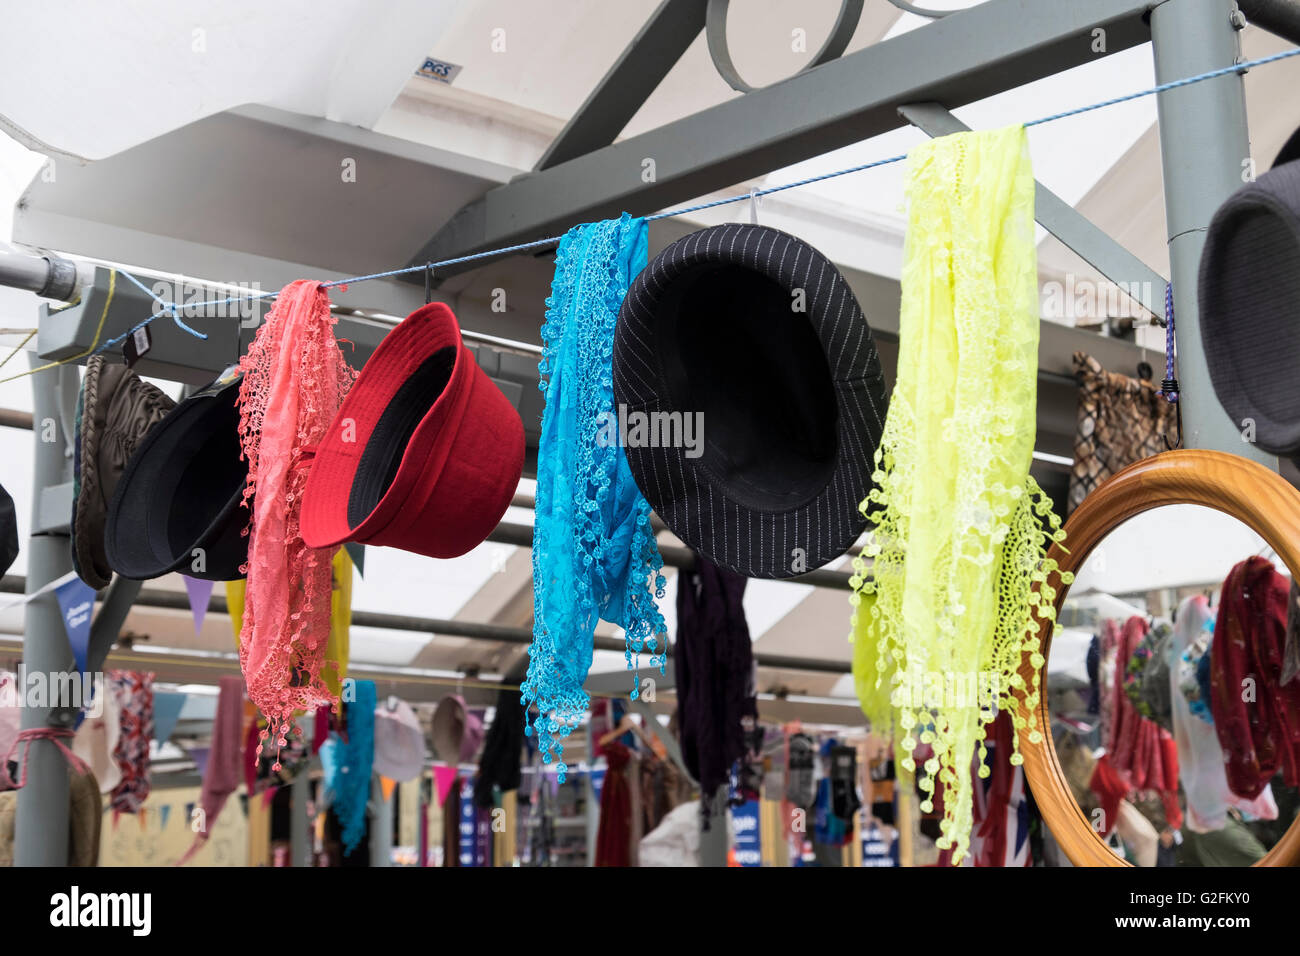 Market stall with colourful hats and scarves Stock Photo